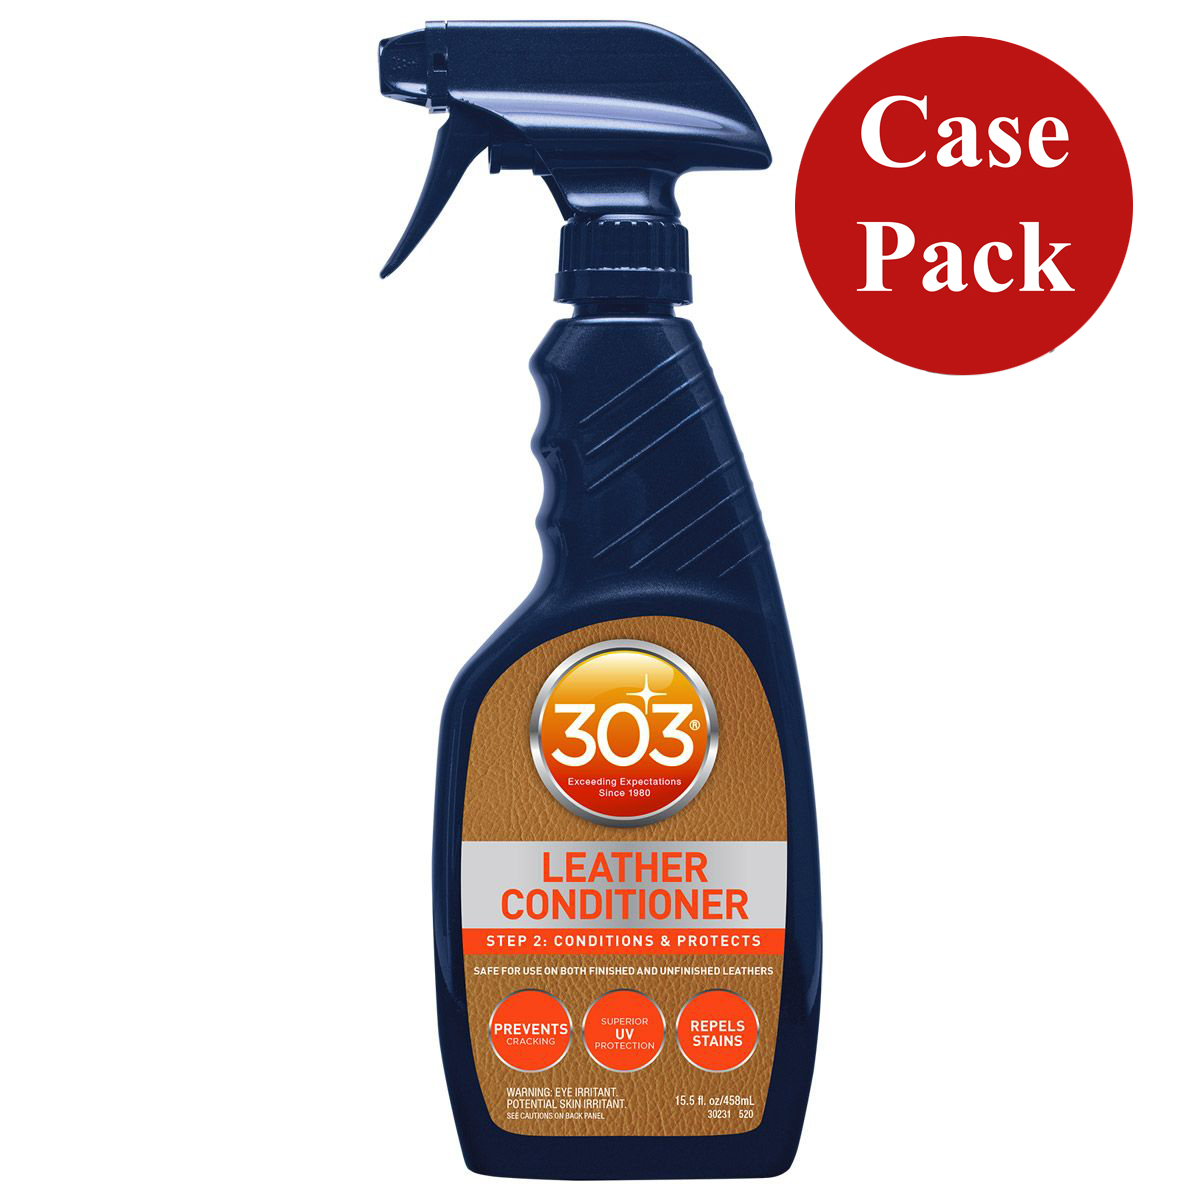 image for 303 Leather Conditioner – 16oz *Case of 6*